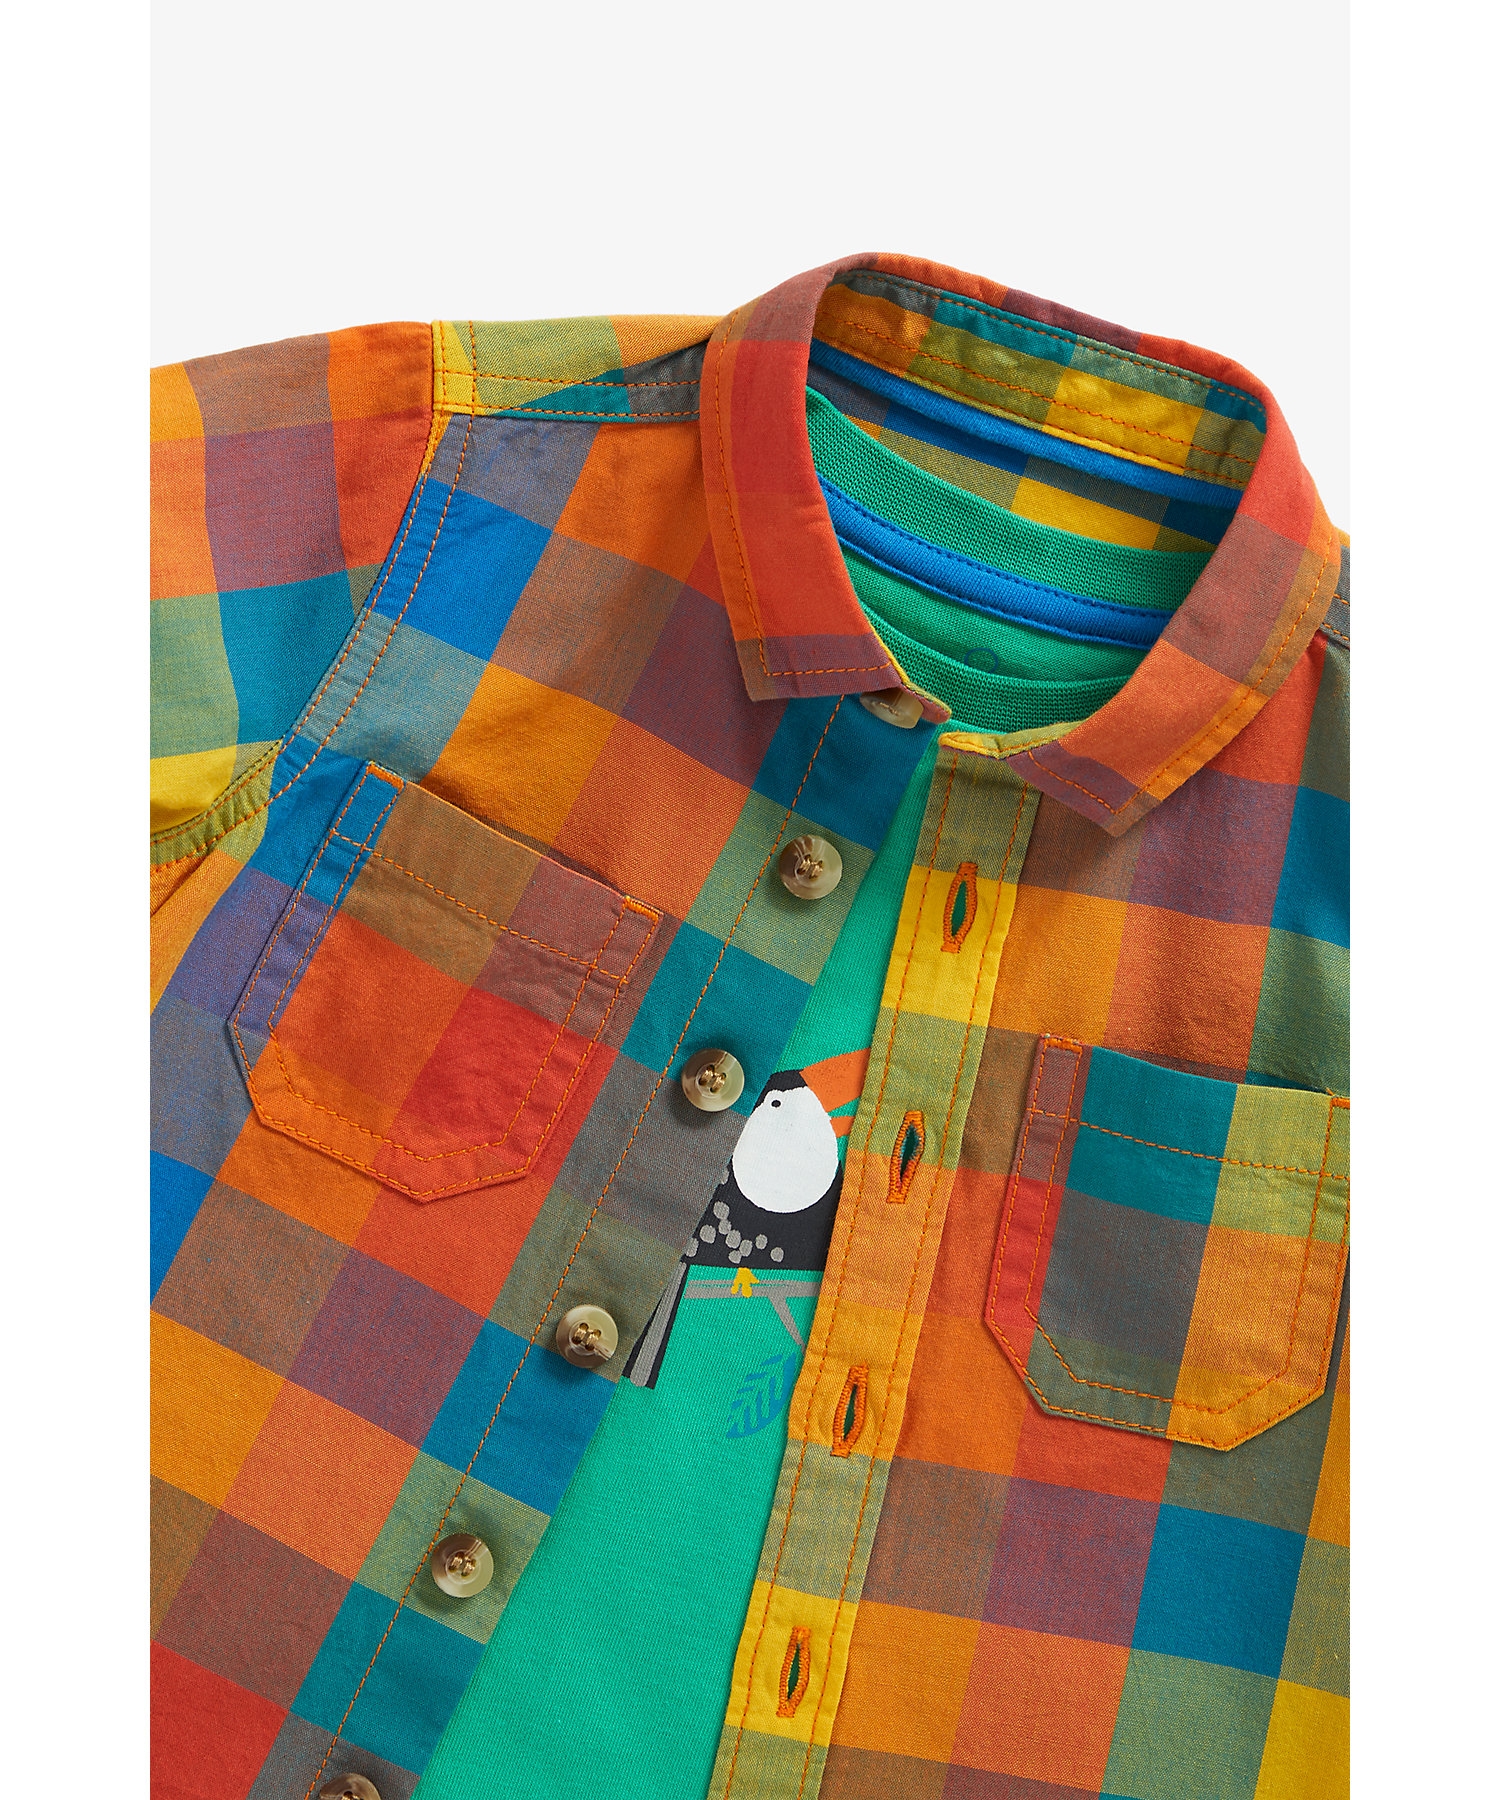 Boys Half Sleeves Shirt with T Shirt Checked-Multicolor